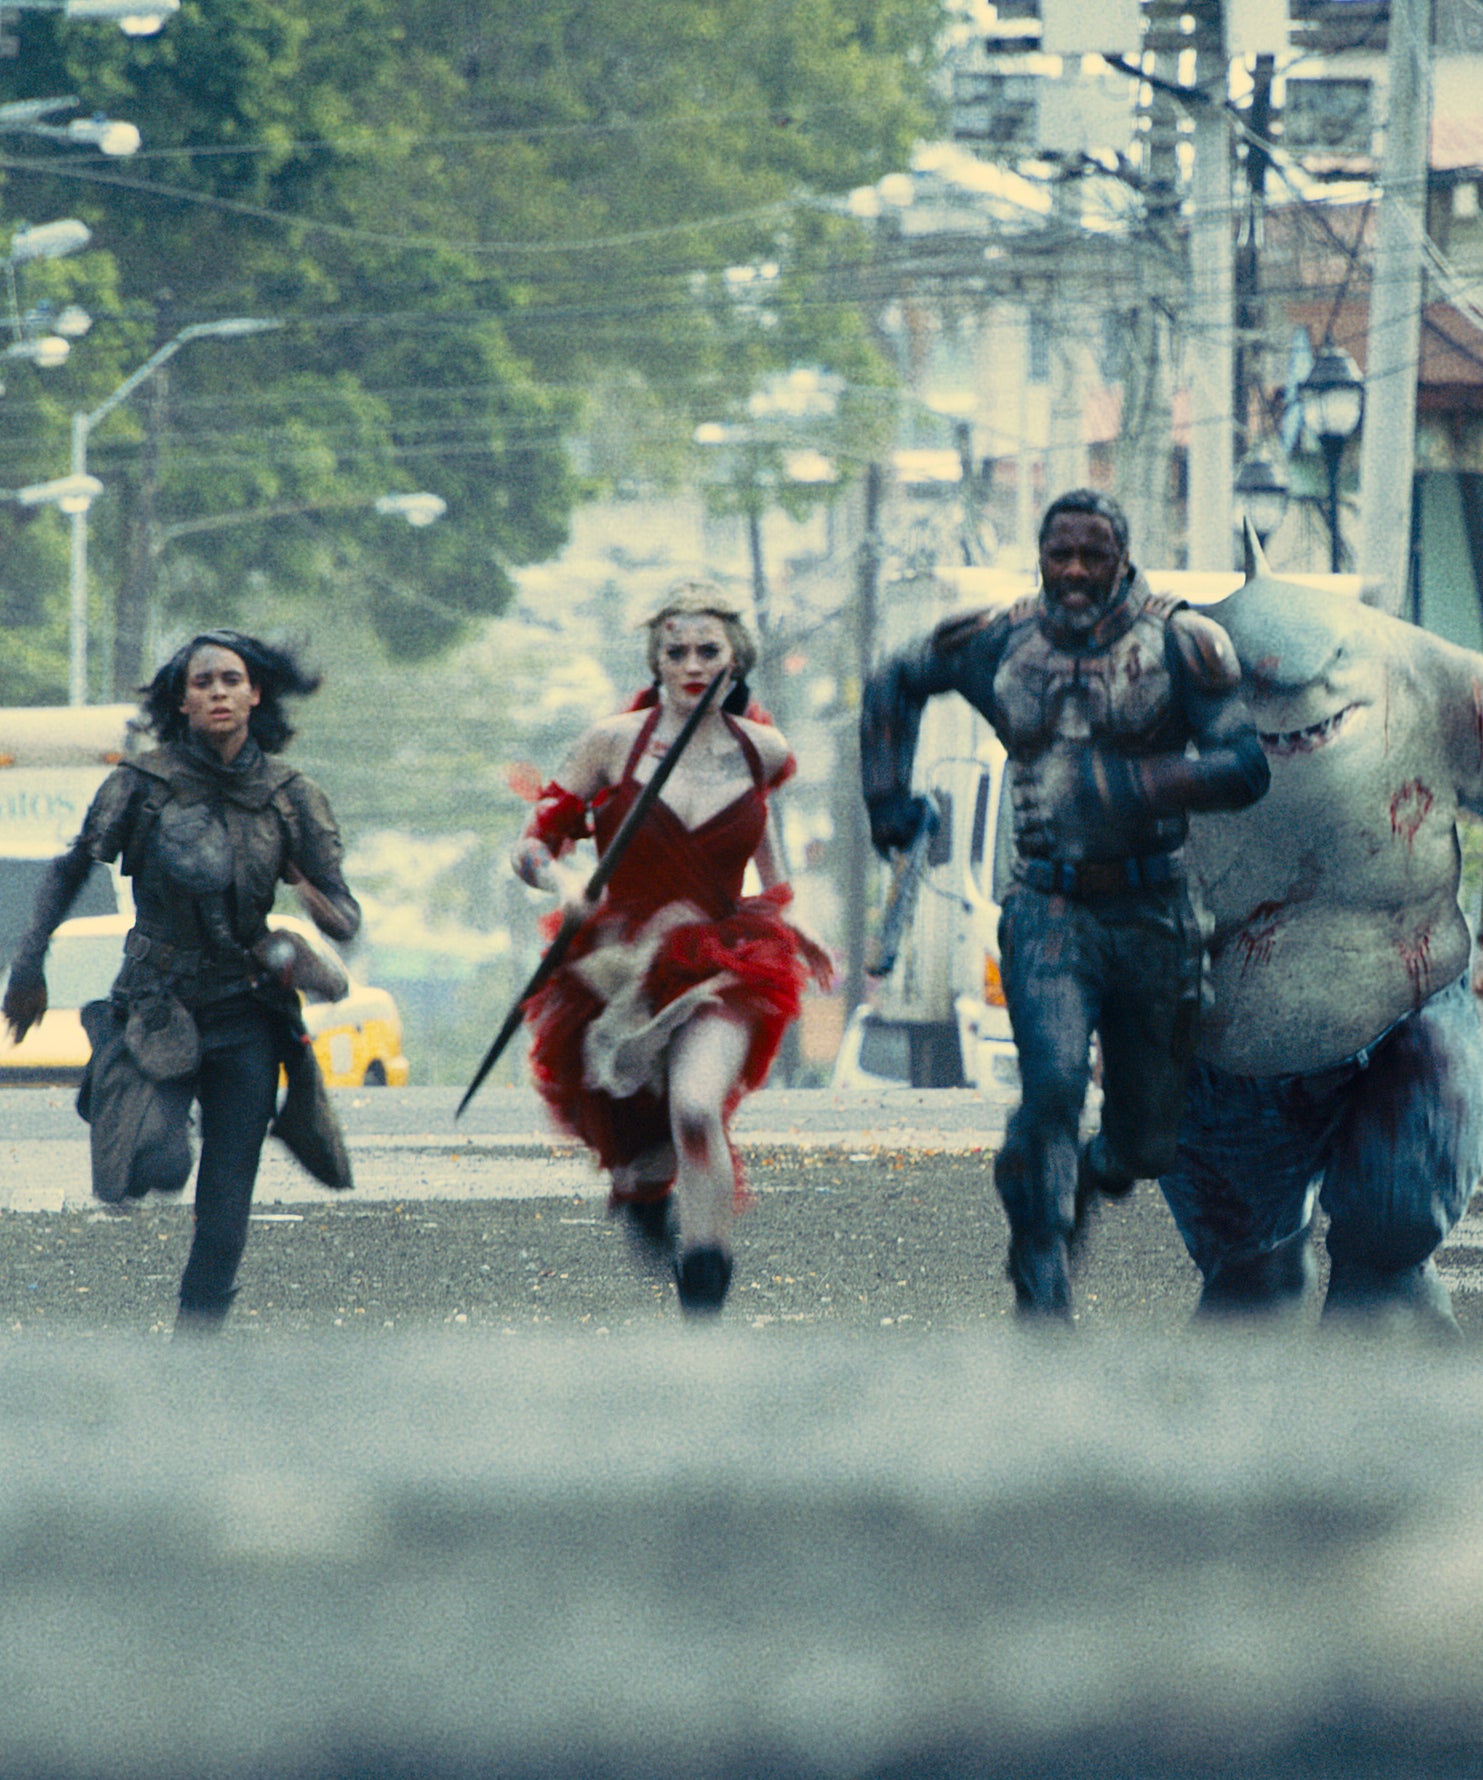 A Tale of Two Squads: Comparing 'Suicide Squad' and 'The Suicide